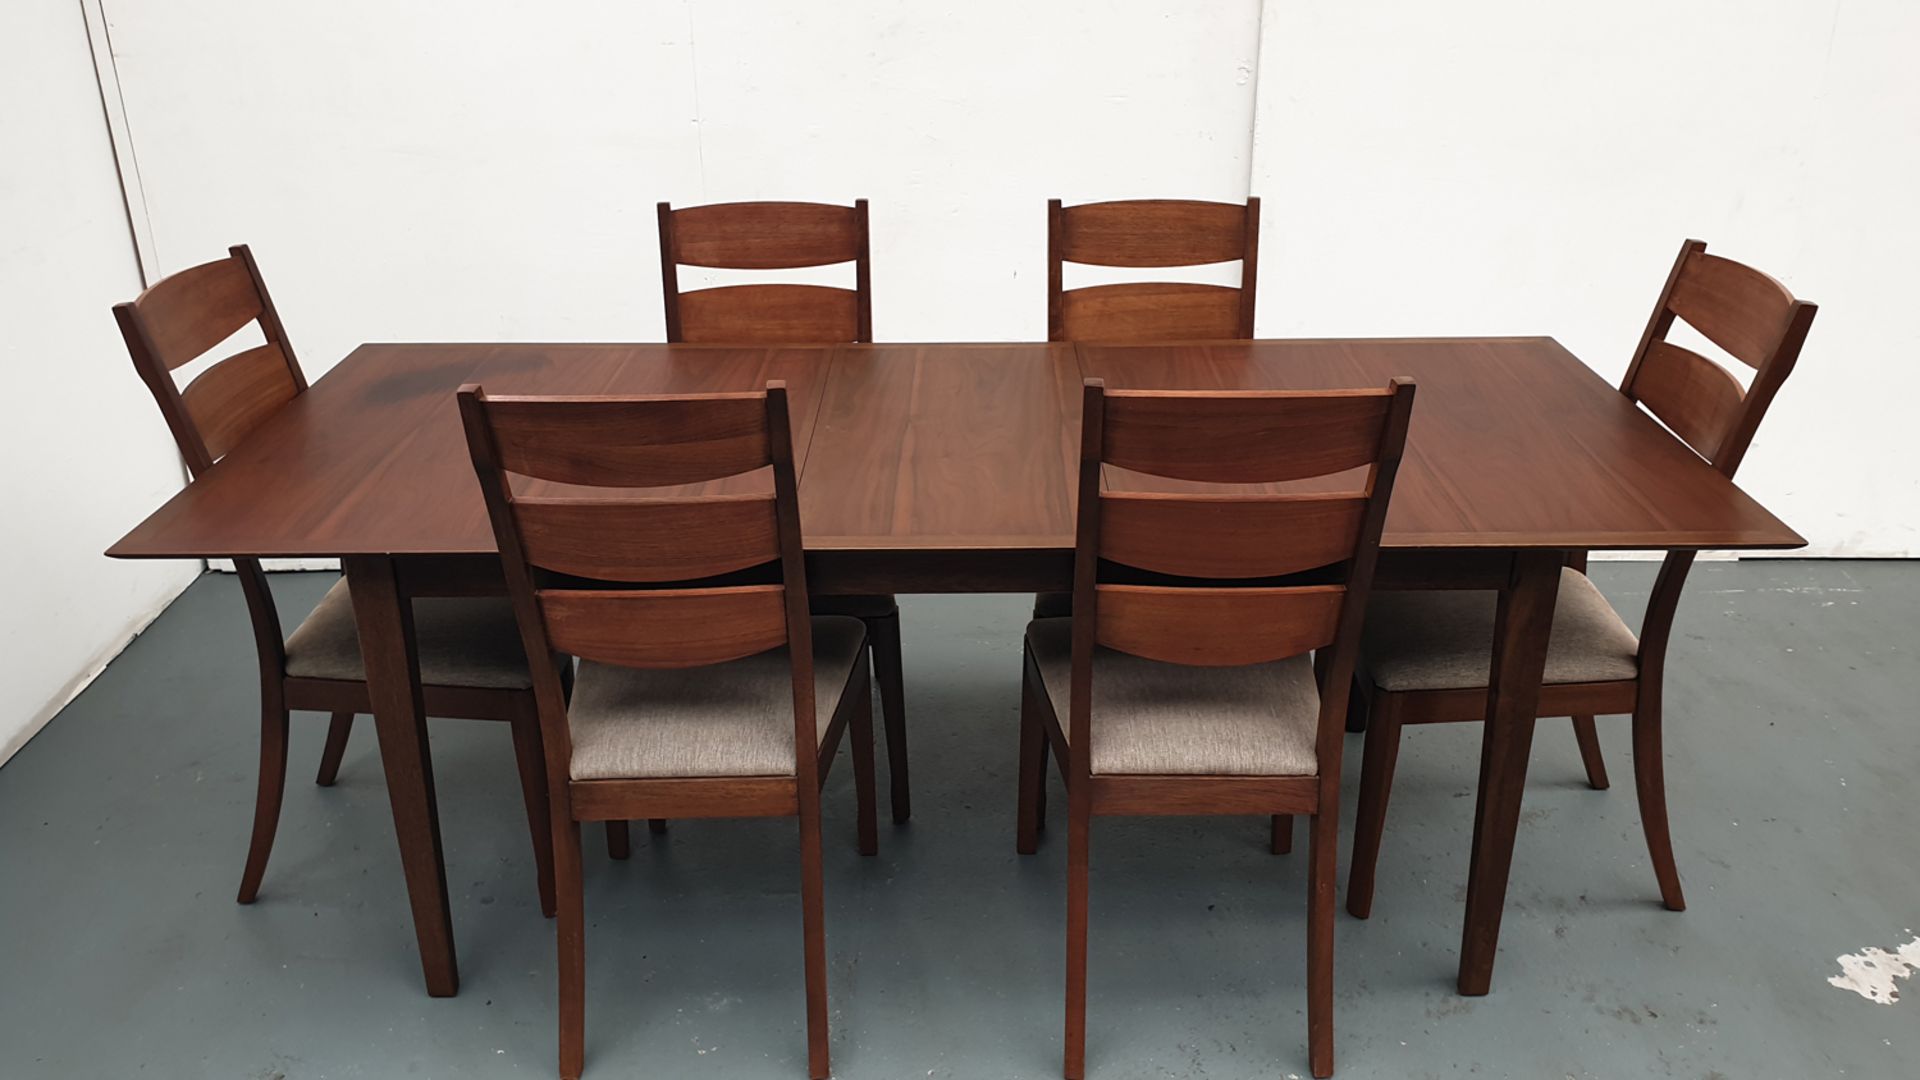 Solid Wood Dining Table & Chairs. Approx Dimensions 1700mm x 900mm x 780mm High. - Image 8 of 11